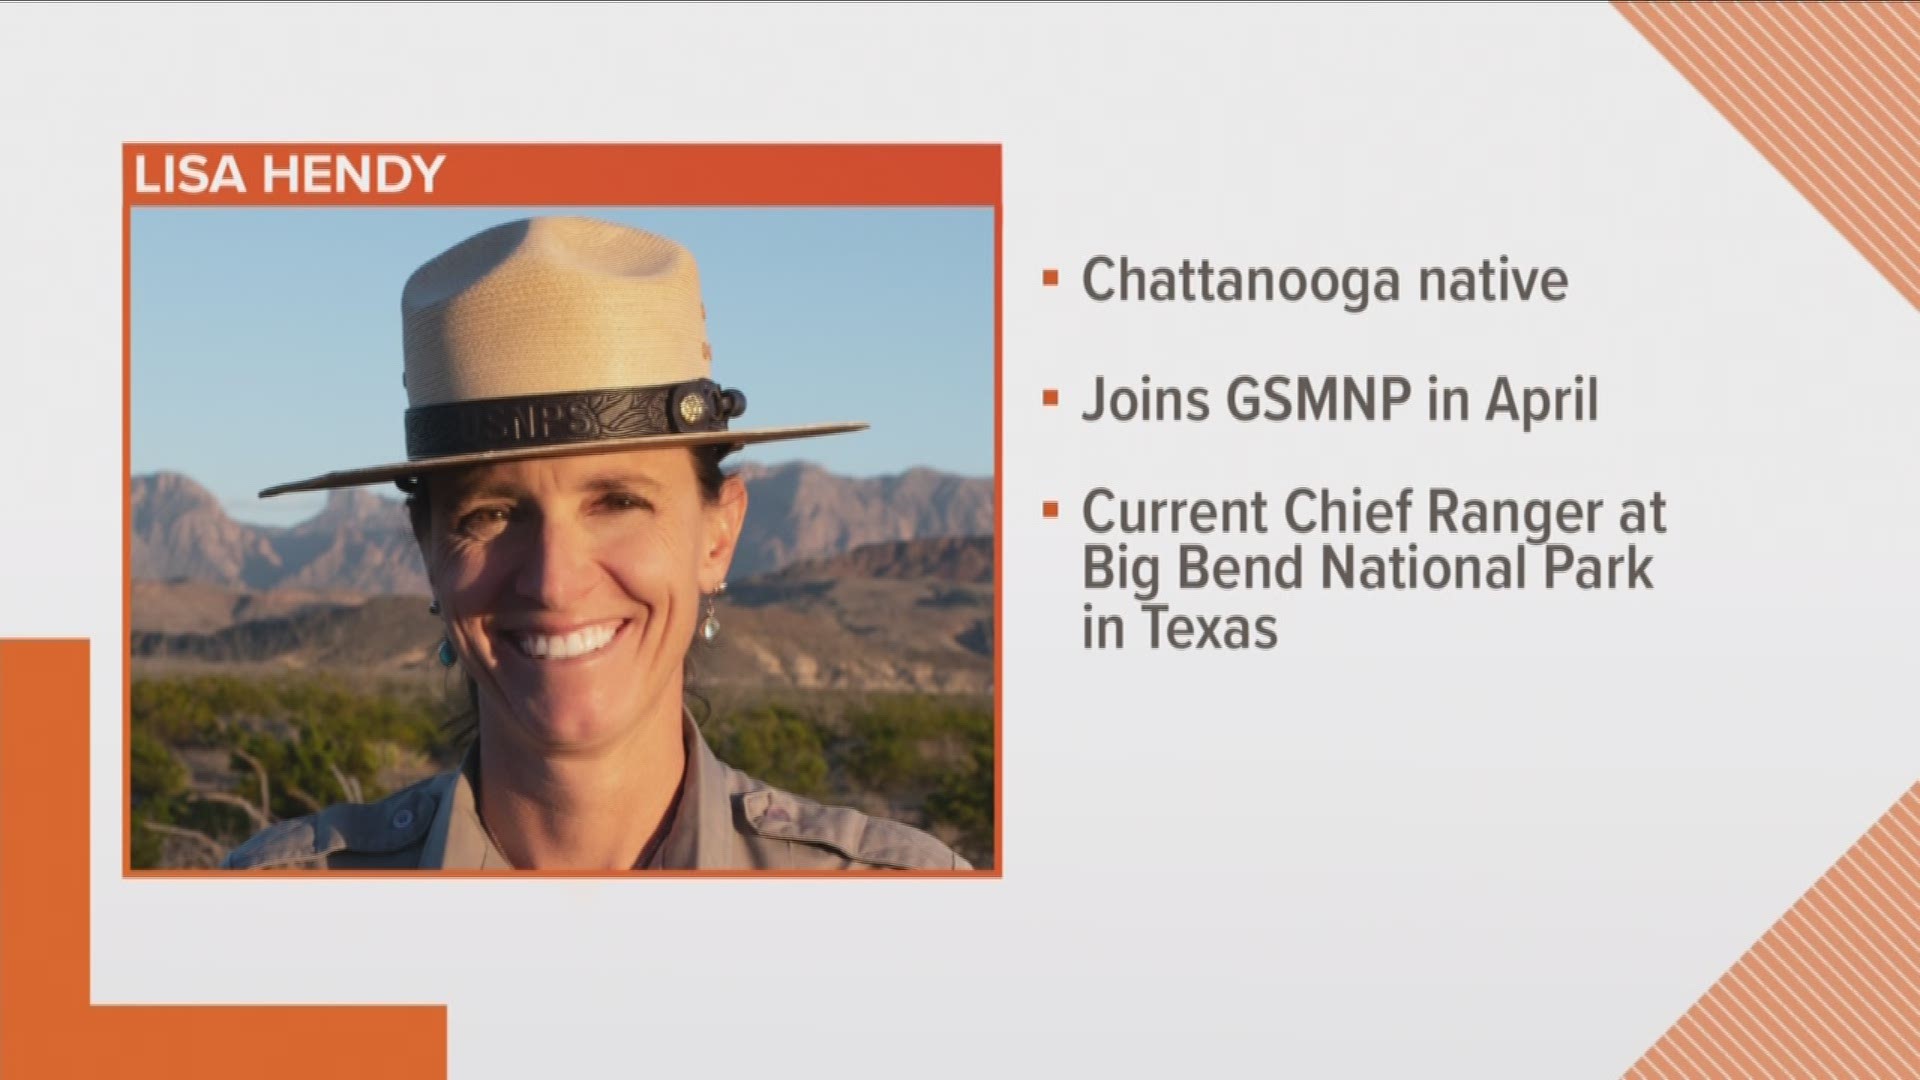 The National Park Service says Chattanooga native Lisa Hendy will join the park in April.